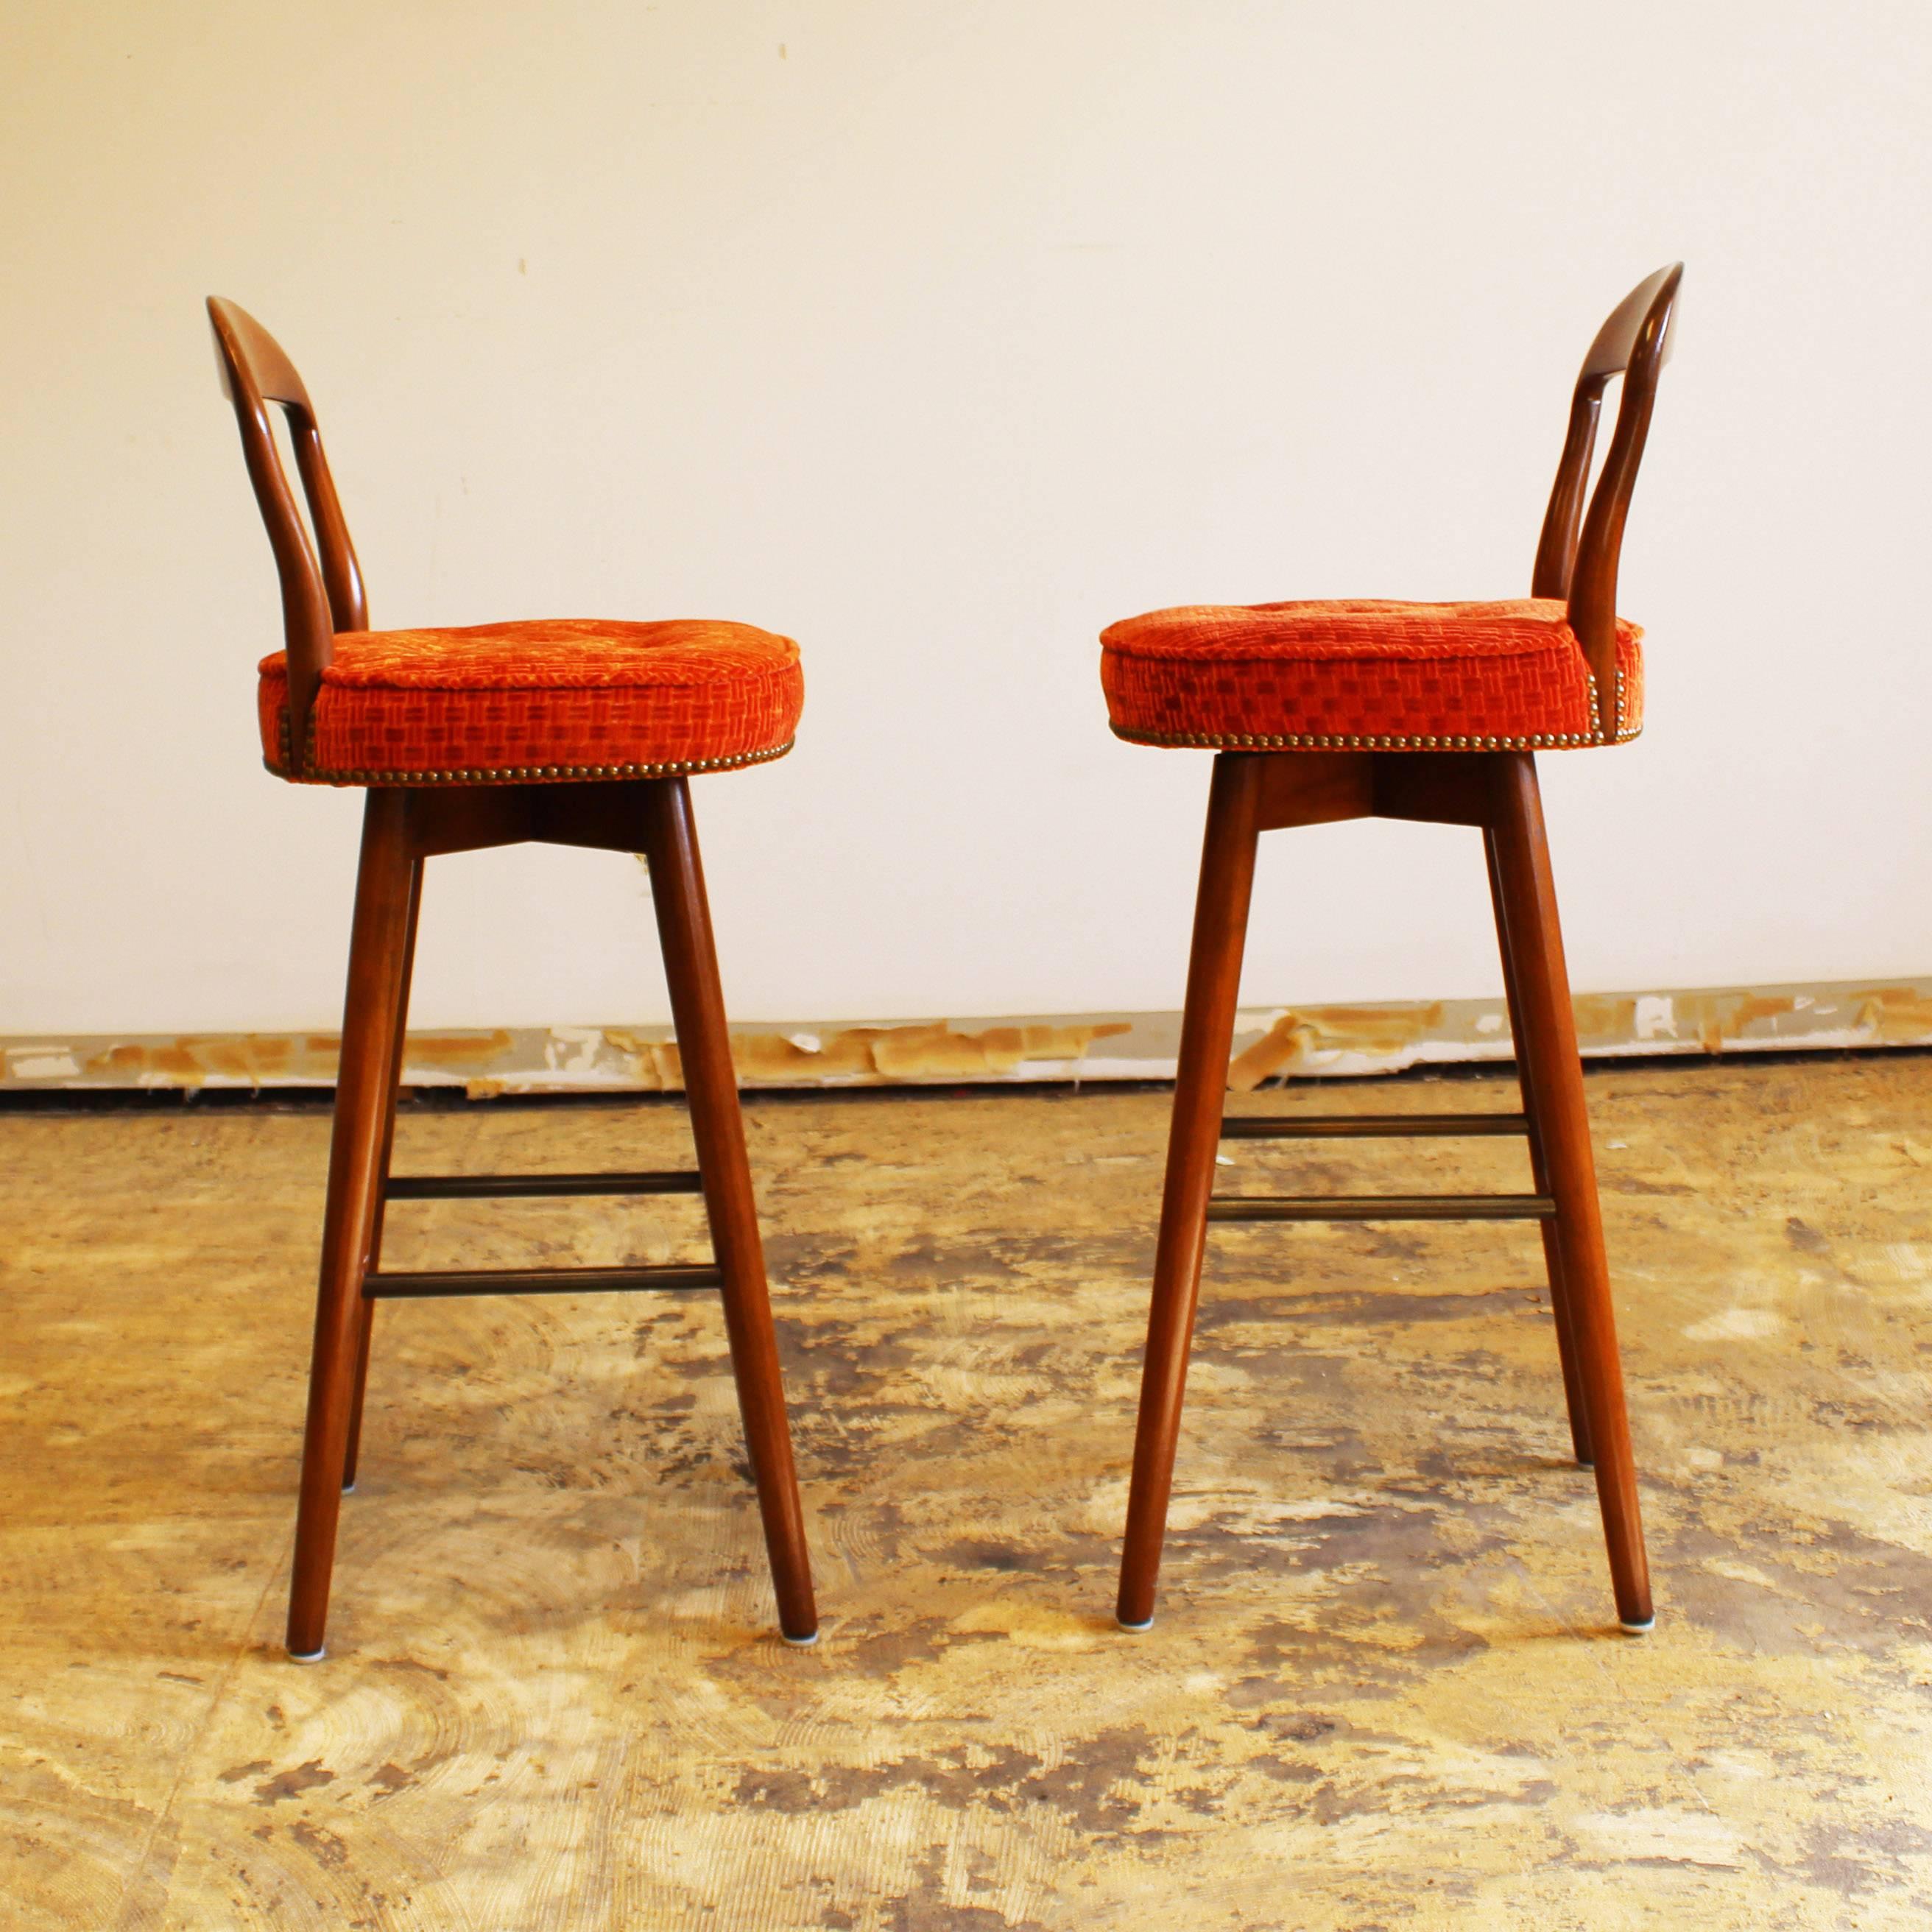 For your consideration is a delightful set of four Danish bar stools by Rosengren Hansen, circa 1960s. In excellent condition. The dimensions are 17